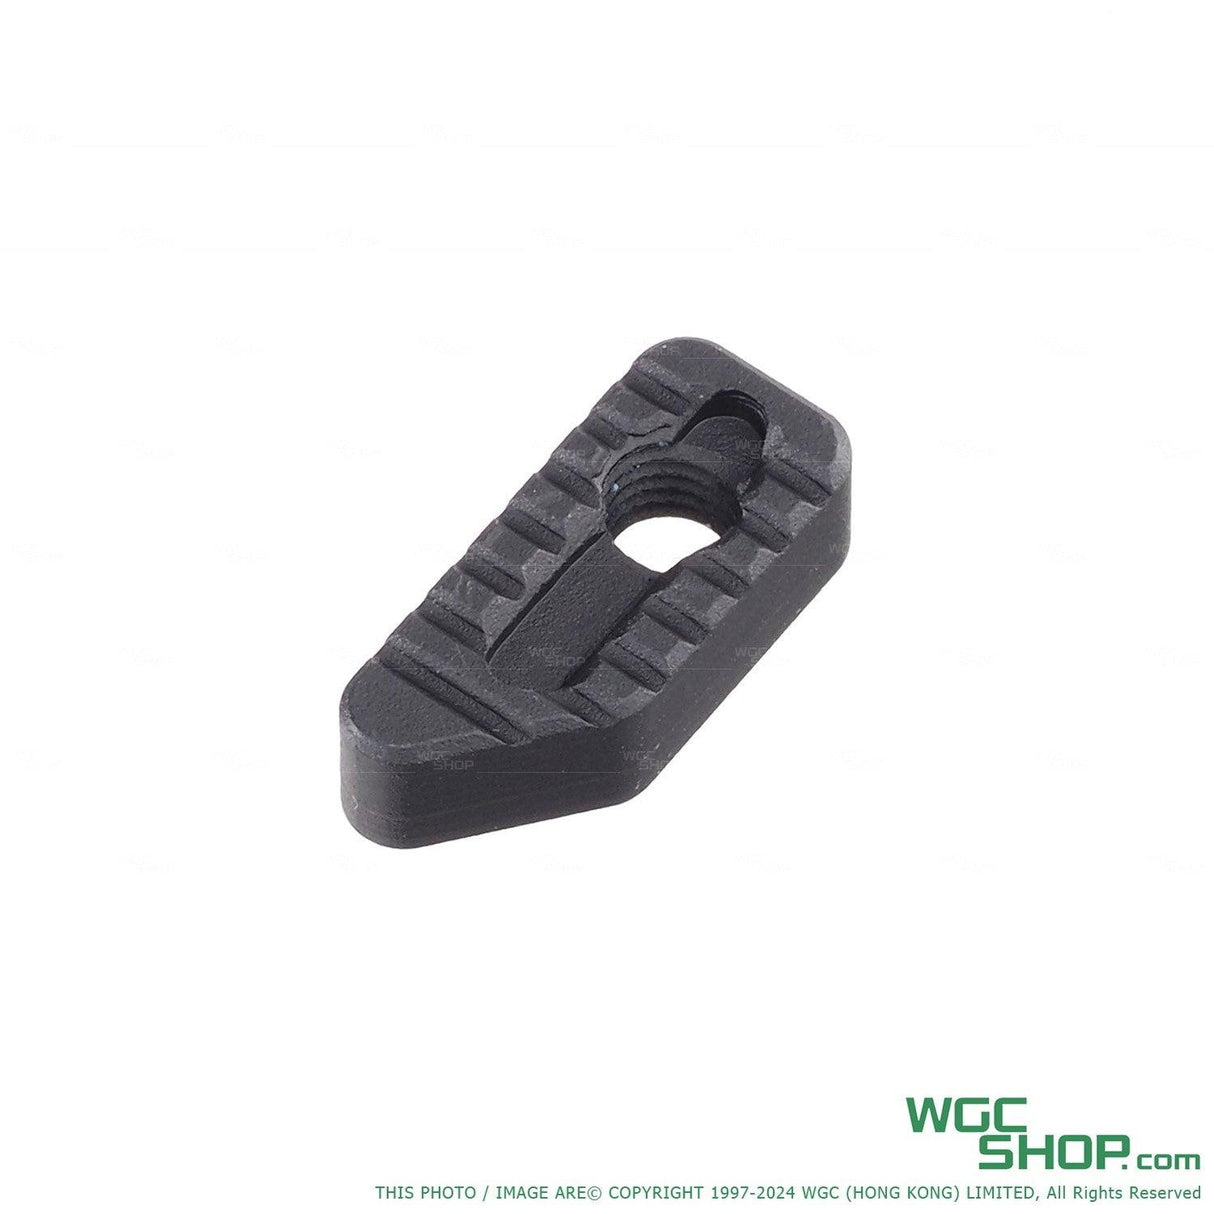 GUNDAY CSMR Style Mag Release for MPX / MCX GBB Airsoft - WGC Shop